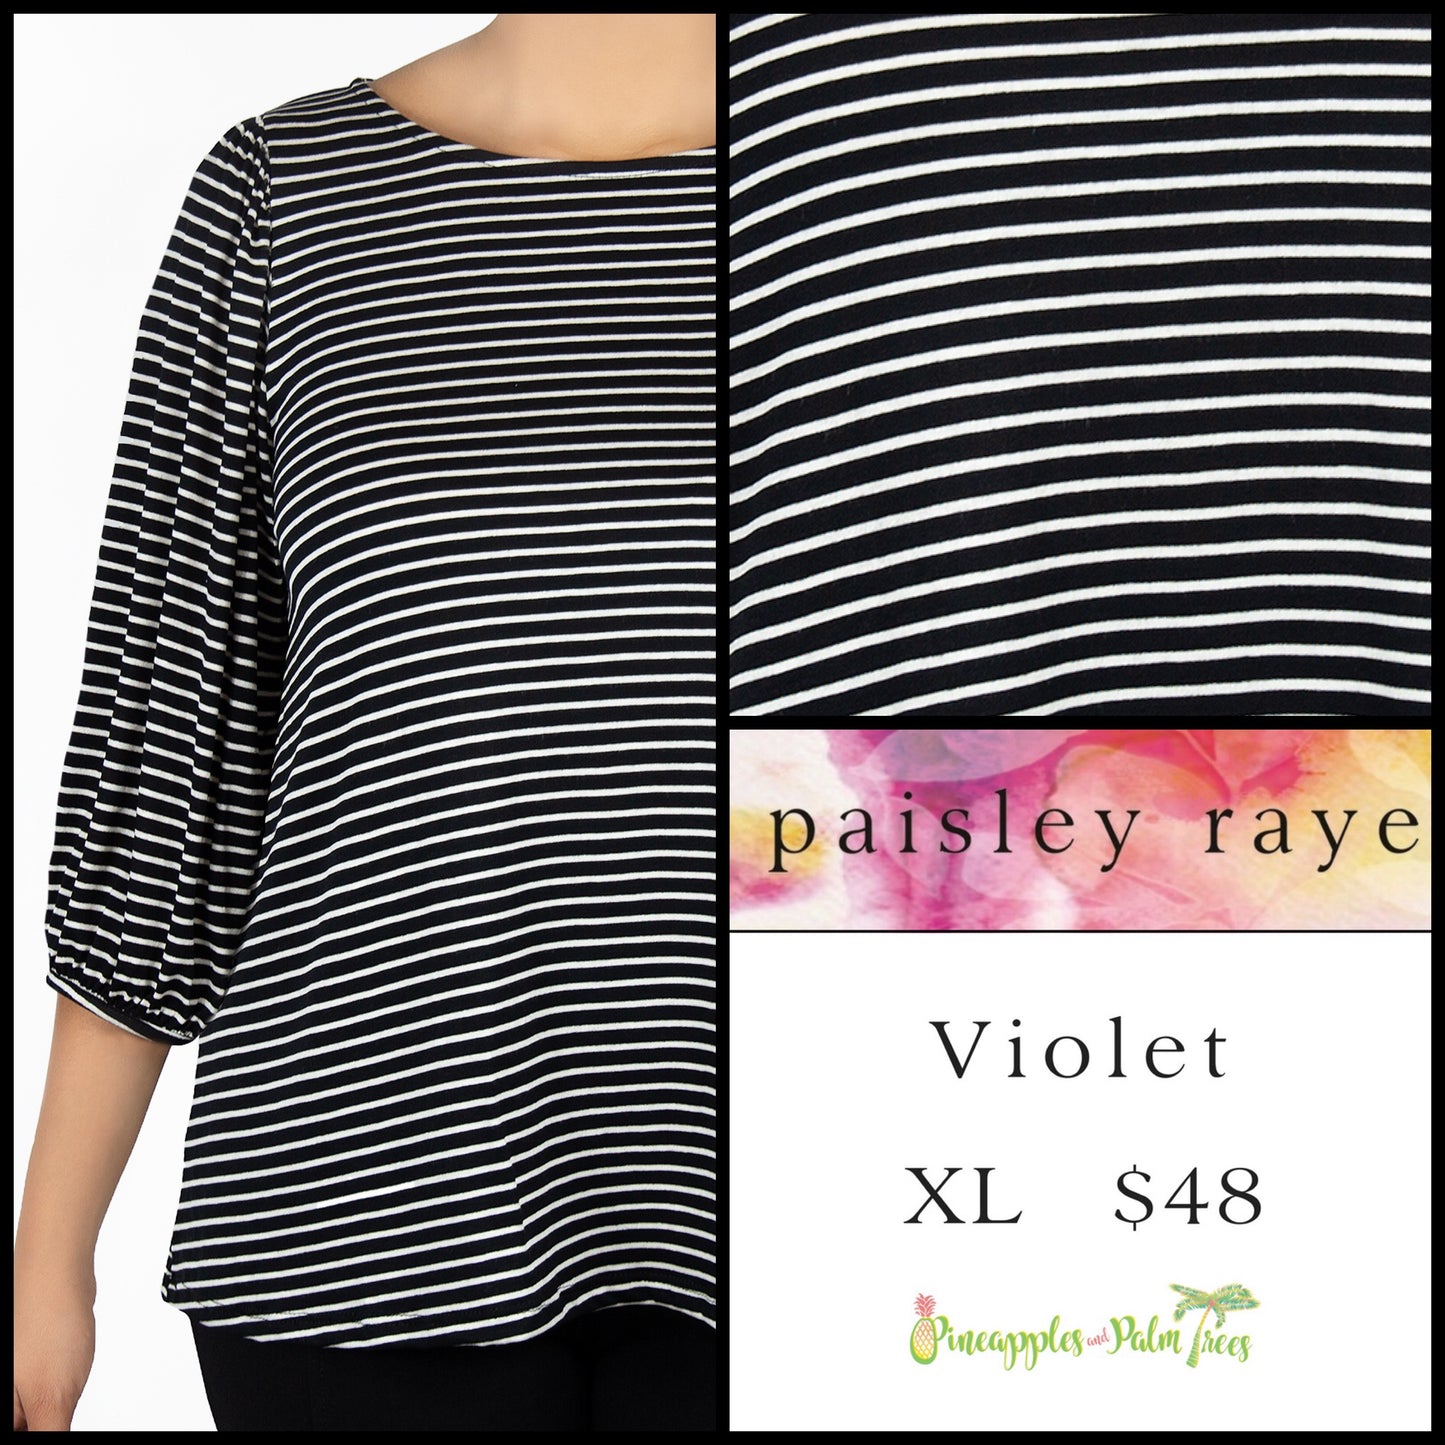 Top: Violet XL - white and black stripes